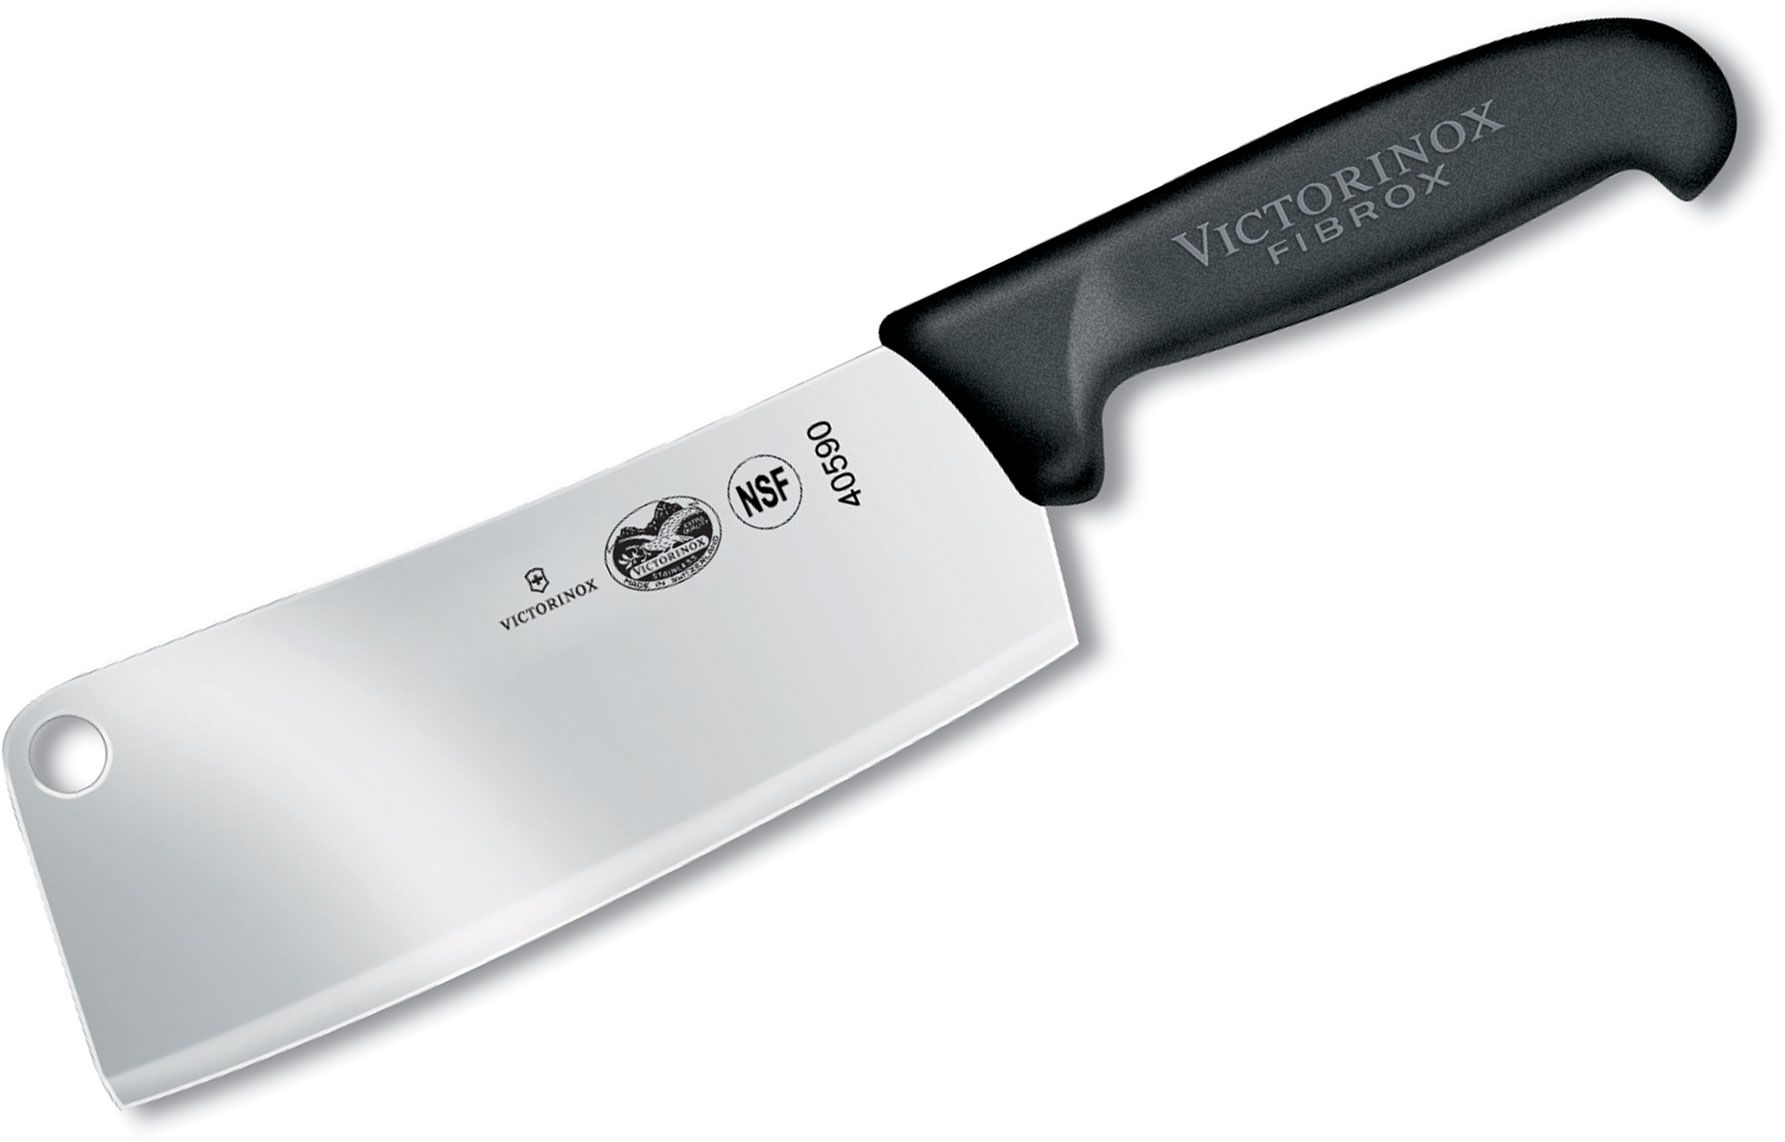 Victorinox Forschner Fibrox 7 Cleaver - Red Hill Cutlery